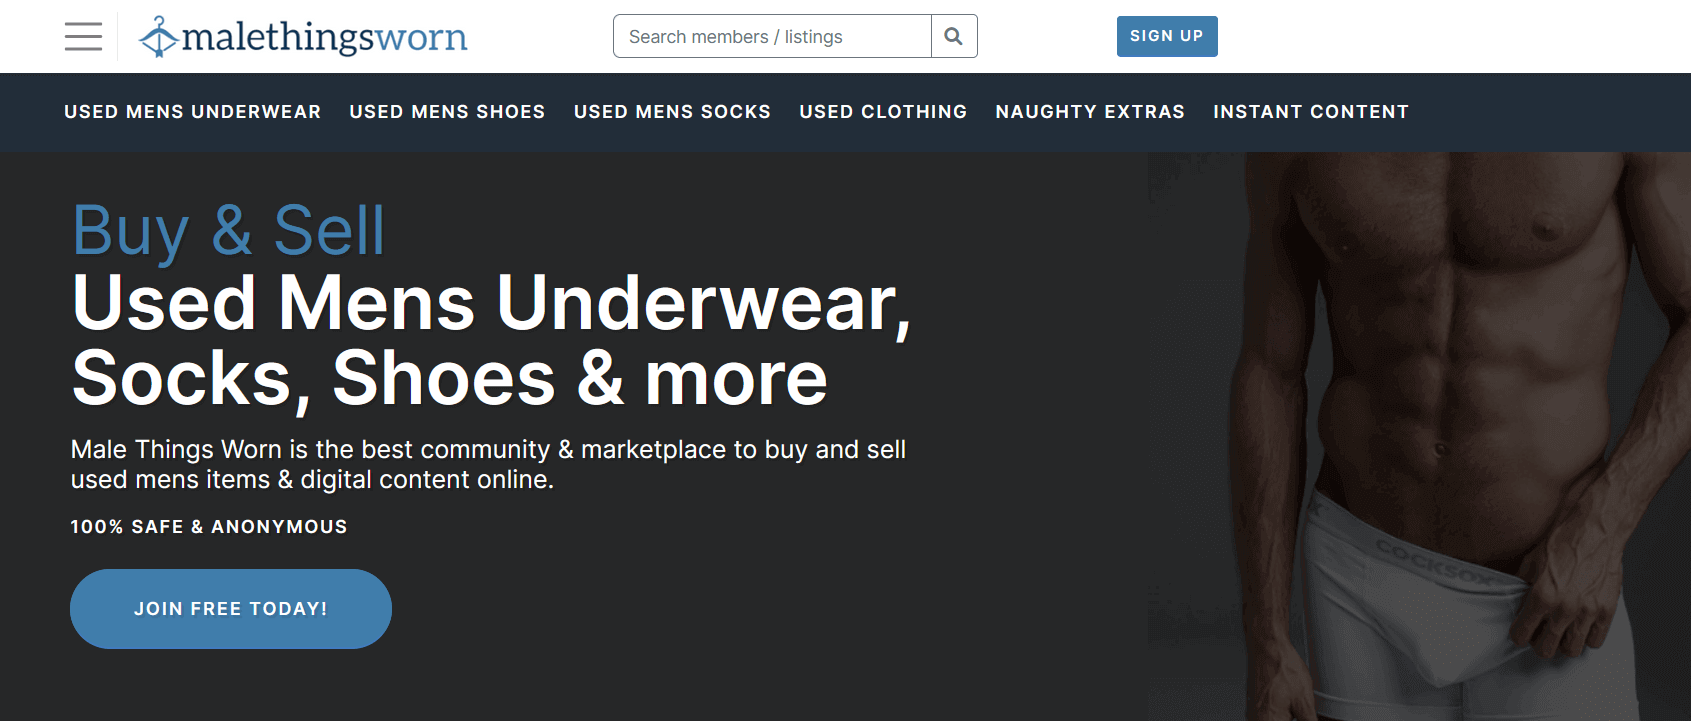 Screenshot of MaleThingsWorn Homepage taken while searching for apps to sell used socks